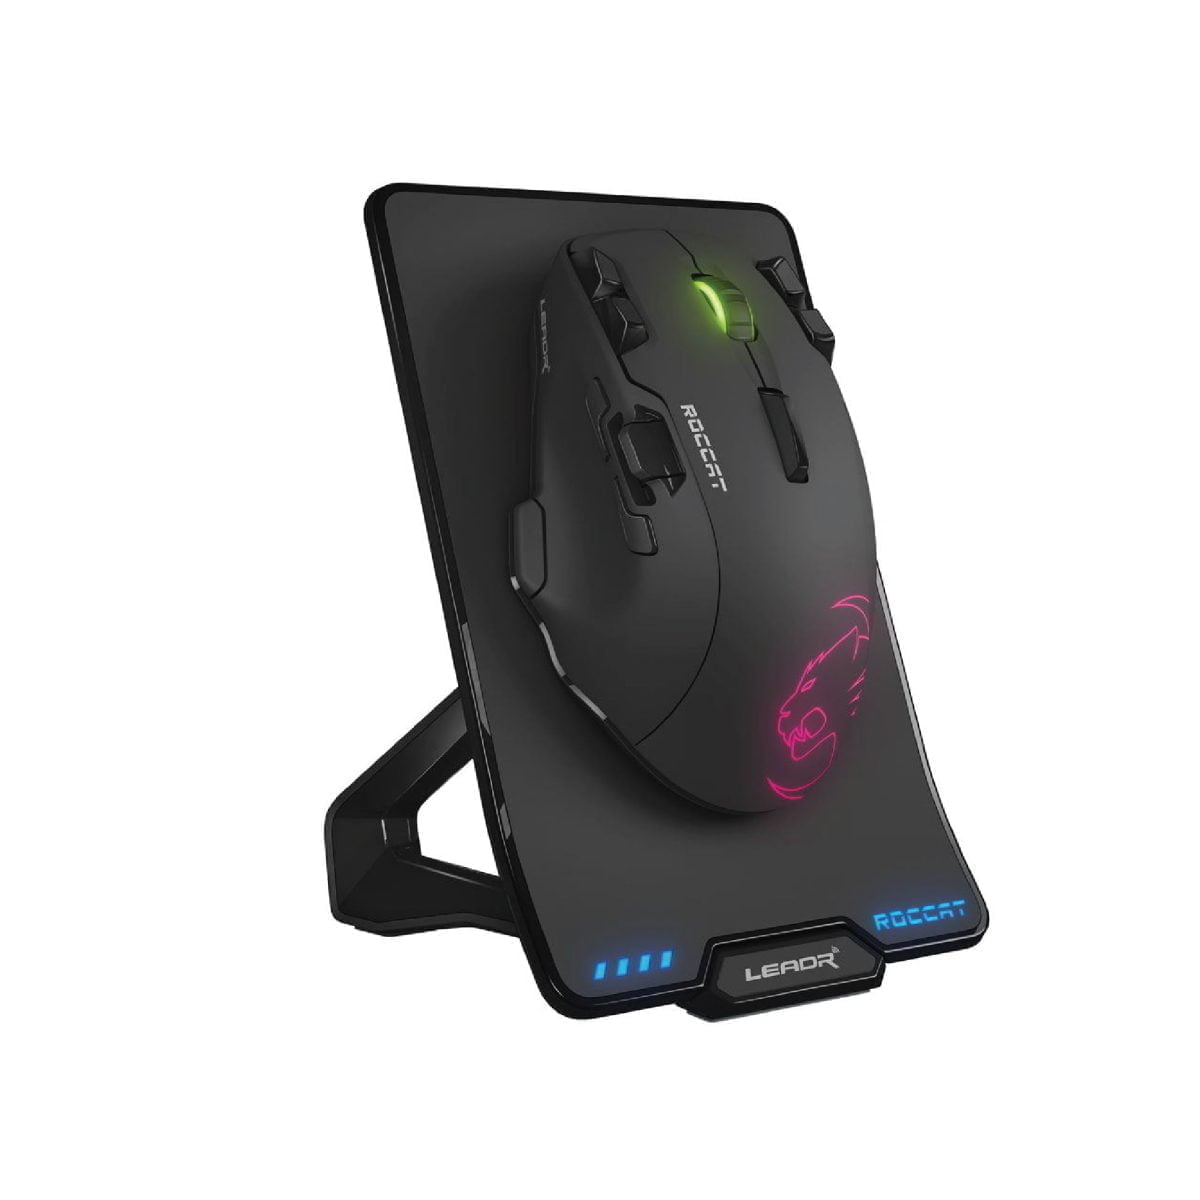 Mouse 09 Roccat &Lt;P Class=&Quot;Copytext&Quot;&Gt;&Lt;Span Style=&Quot;Color: #000000;&Quot;&Gt;What Sets The Leadr Apart From Its Competitors Is Its Pioneering Wireless Technology. Leadr Was Developed With A View To Providing Gamers With A Wireless Mouse That Performed Just As Well As A Wired One. With 1000Hz Polling And 2.4Ghz Data Transmission – Faster Than Usb – It Boasts Zero Lag And Virtually Latency, For Lightning-Fast Input. This Technology Is Complemented By The Pioneering Roccat® Owl-Eye Optical Sensor, Which Is Optimized For Wireless. Other Wireless Mice Make Sacrifices By Using Power-Saving Modes But Owl-Eye Uses Full Power All The Time, Bringing The Feeling Of Wired To Wireless.&Lt;/Span&Gt;&Lt;/P&Gt; &Lt;B&Gt;We Also Provide International Wholesale And Retail Shipping To All Gcc Countries: Saudi Arabia, Qatar, Oman, Kuwait, Bahrain. &Lt;/B&Gt; Roccat Leadr Wireless Gaming Mouse Roccat Leadr Wireless Gaming Mouse, Black